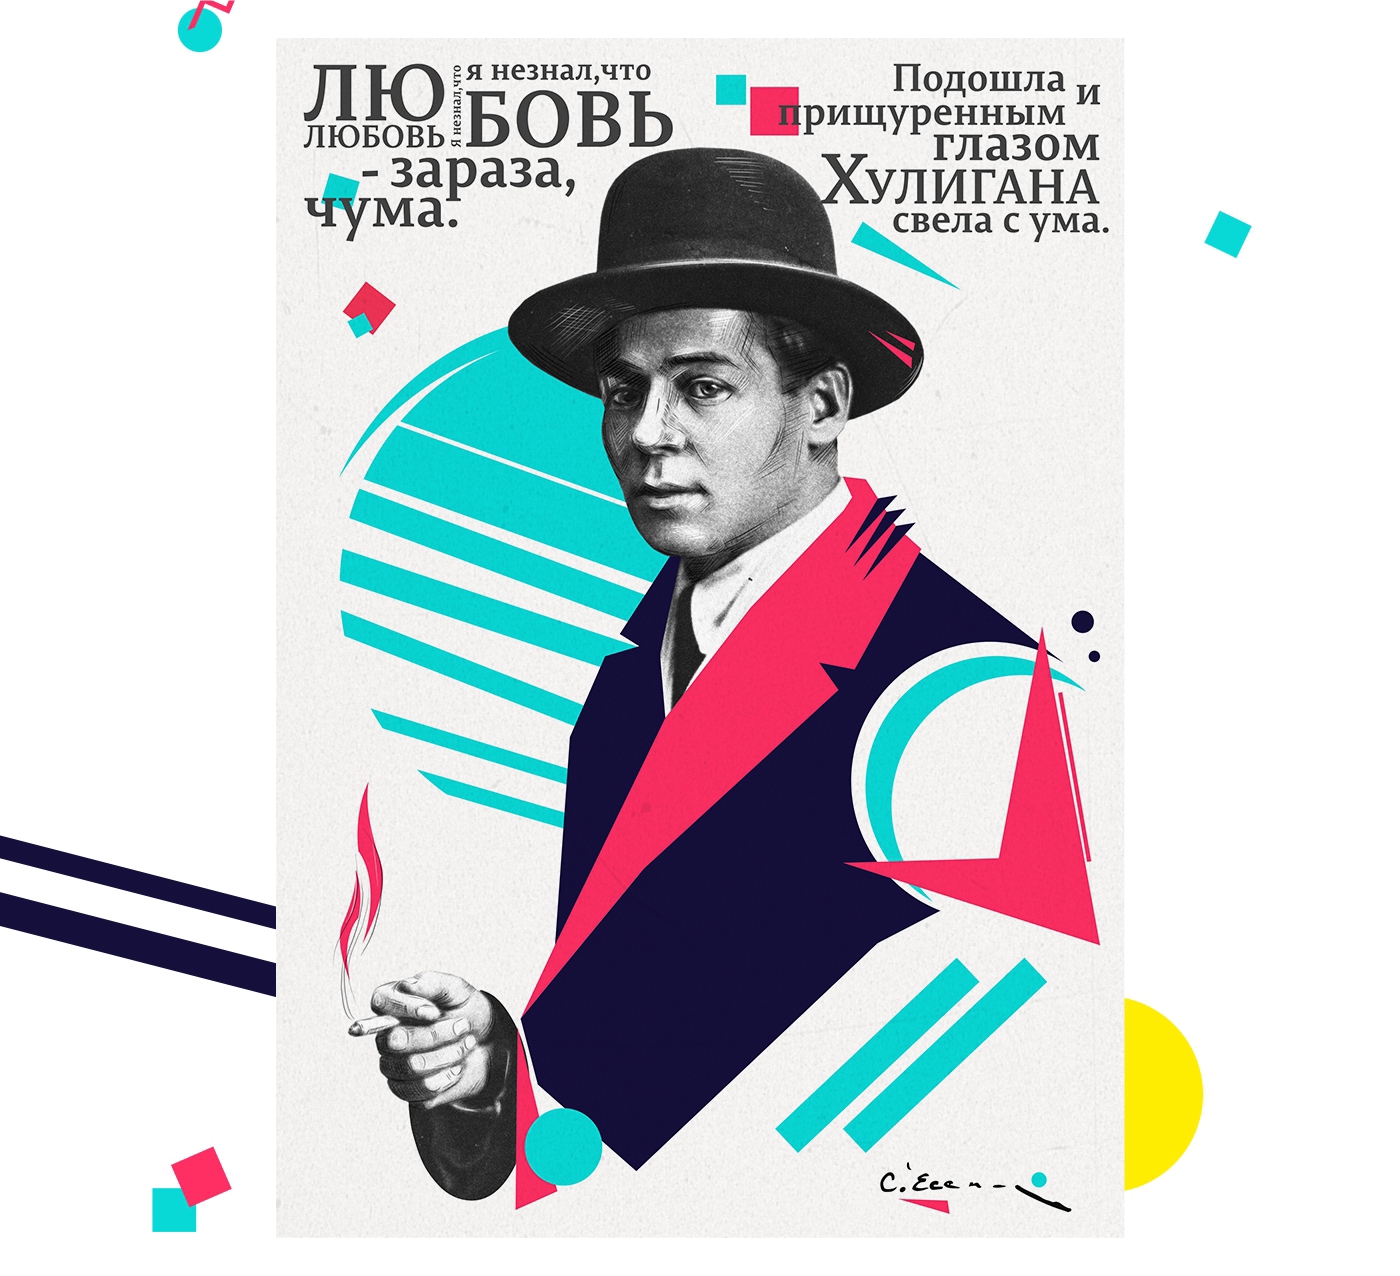 geometry flat poster Portret collage Retro color Poetry  man russian